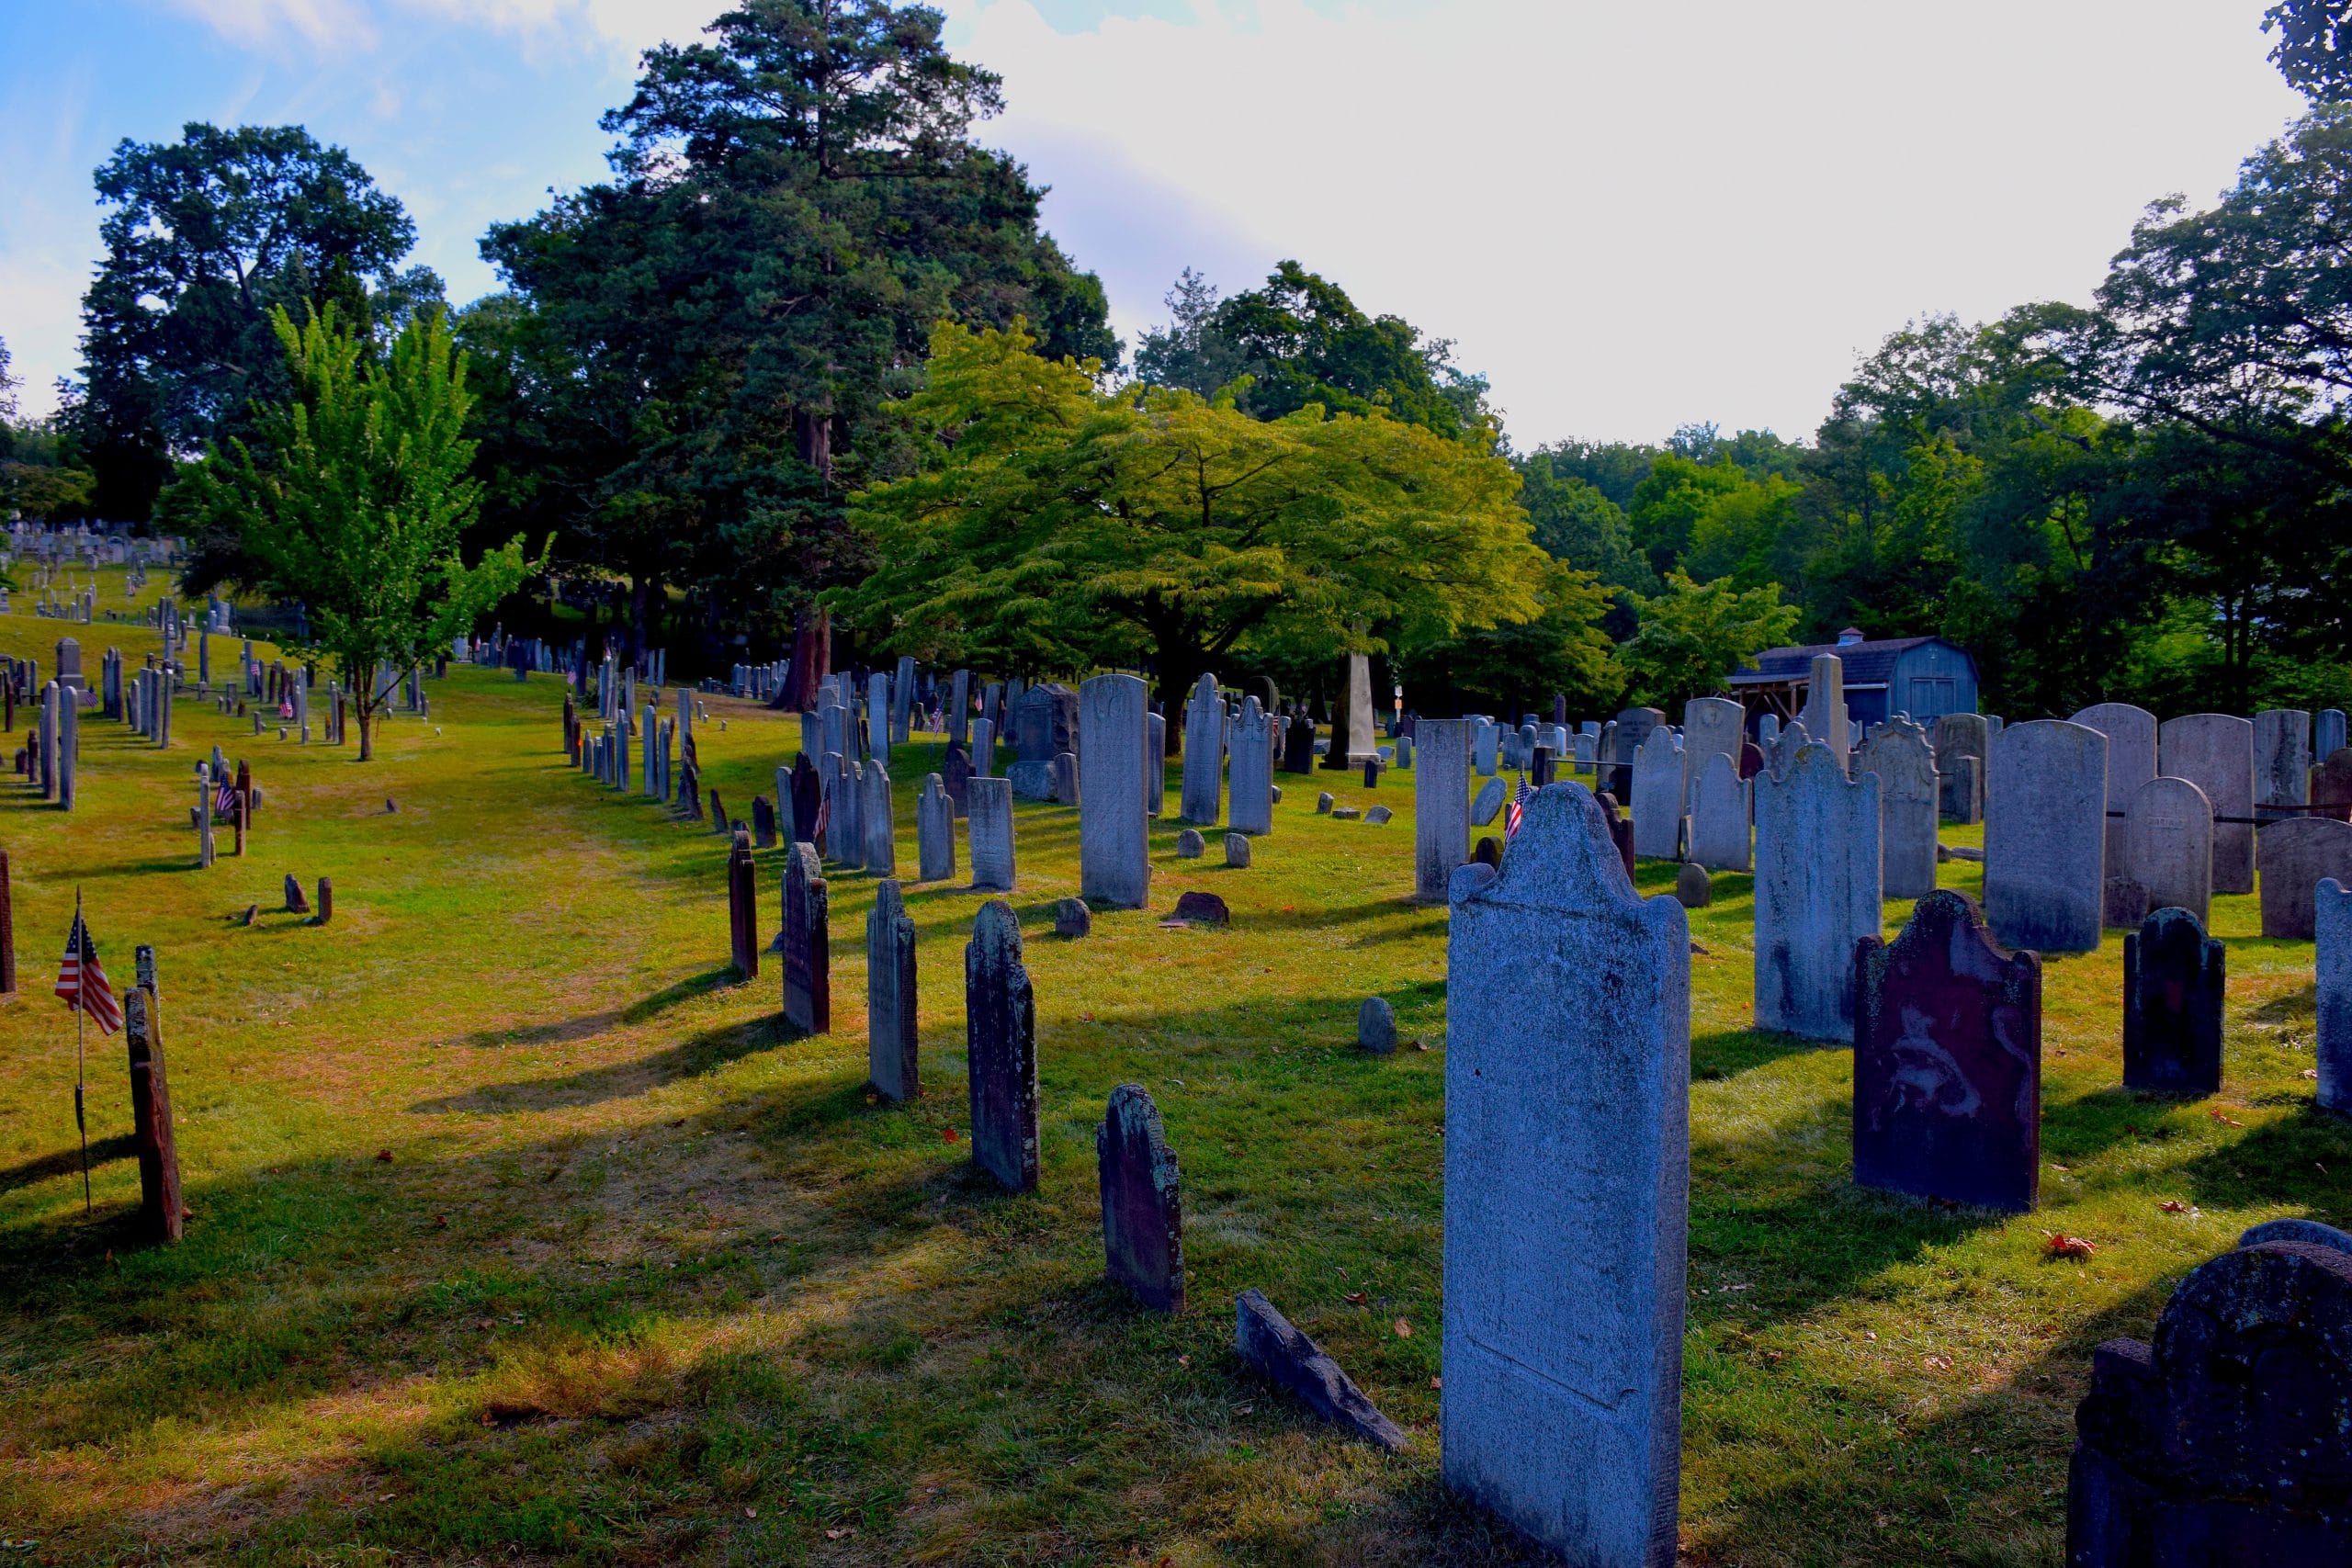 Old Dutch Burying Ground, where Ichabod Crane was chased by the Headless Horseman.